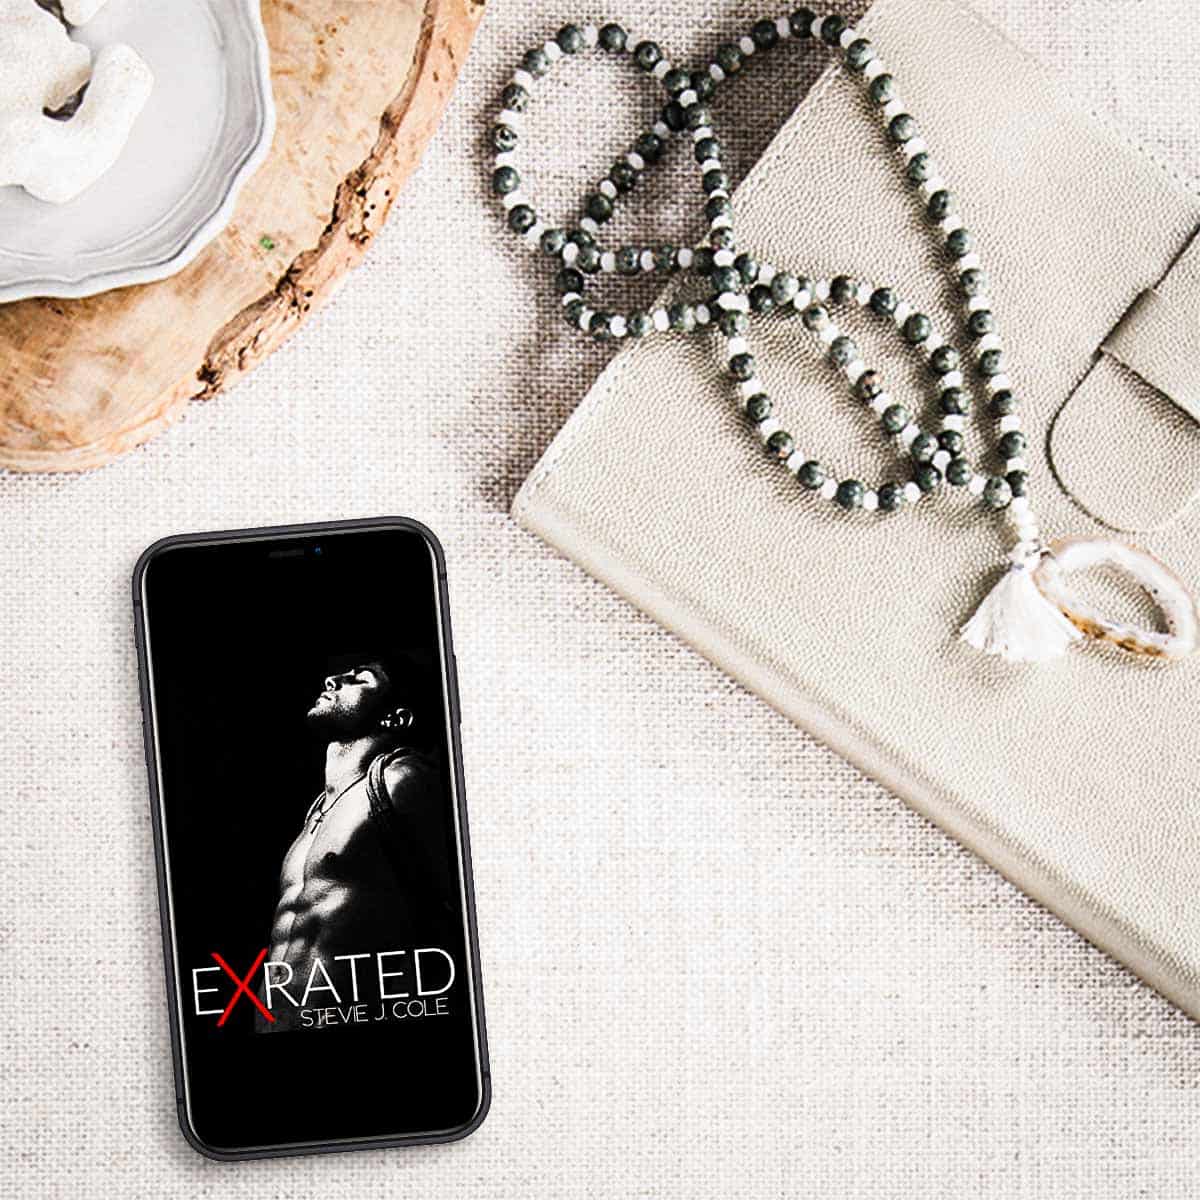 Exrated by Stevie J Cole is an angsty, second-chance romance about an out-of-work actress, her ex-boyfriend, and their chance meeting on the set of his adult movie